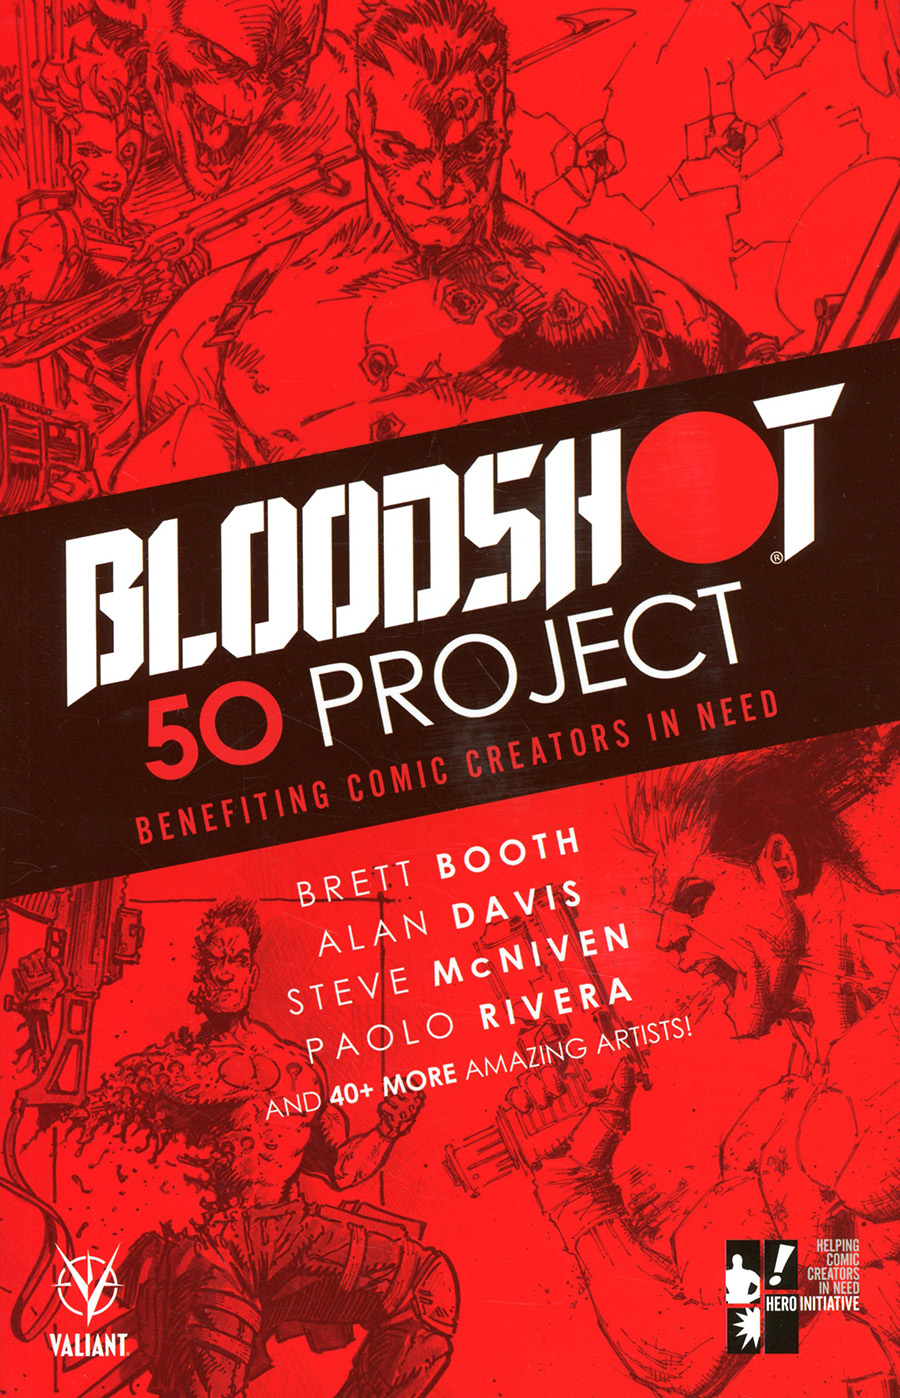 Bloodshot 50 Project Benefiting Comic Creators In Need TP